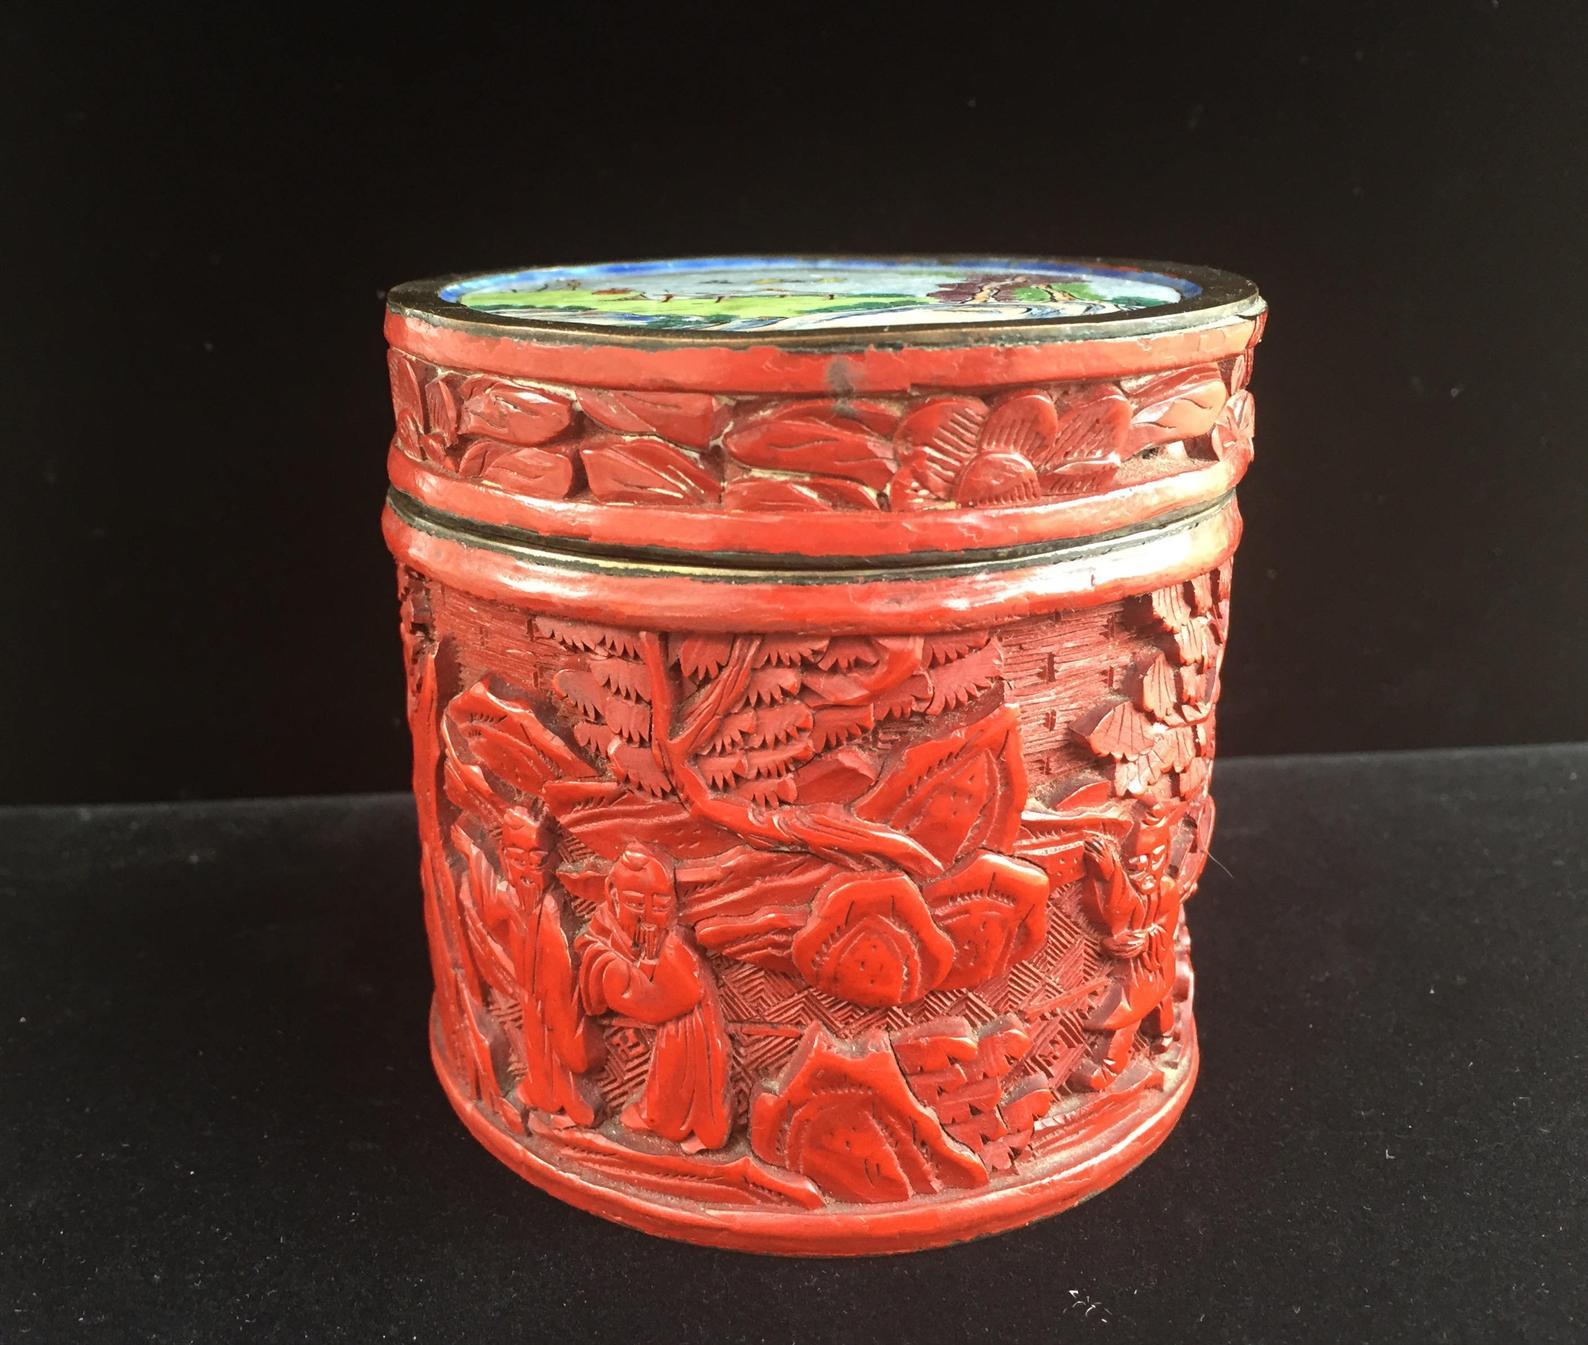 This extraordinary cinnabar lacquer box is a masterpiece and exemplary among the highest level of intricate masterful ancient Chinese traditional carving. The lacquer, which is applied in layers to the metal body, is carved deeply with scenery and